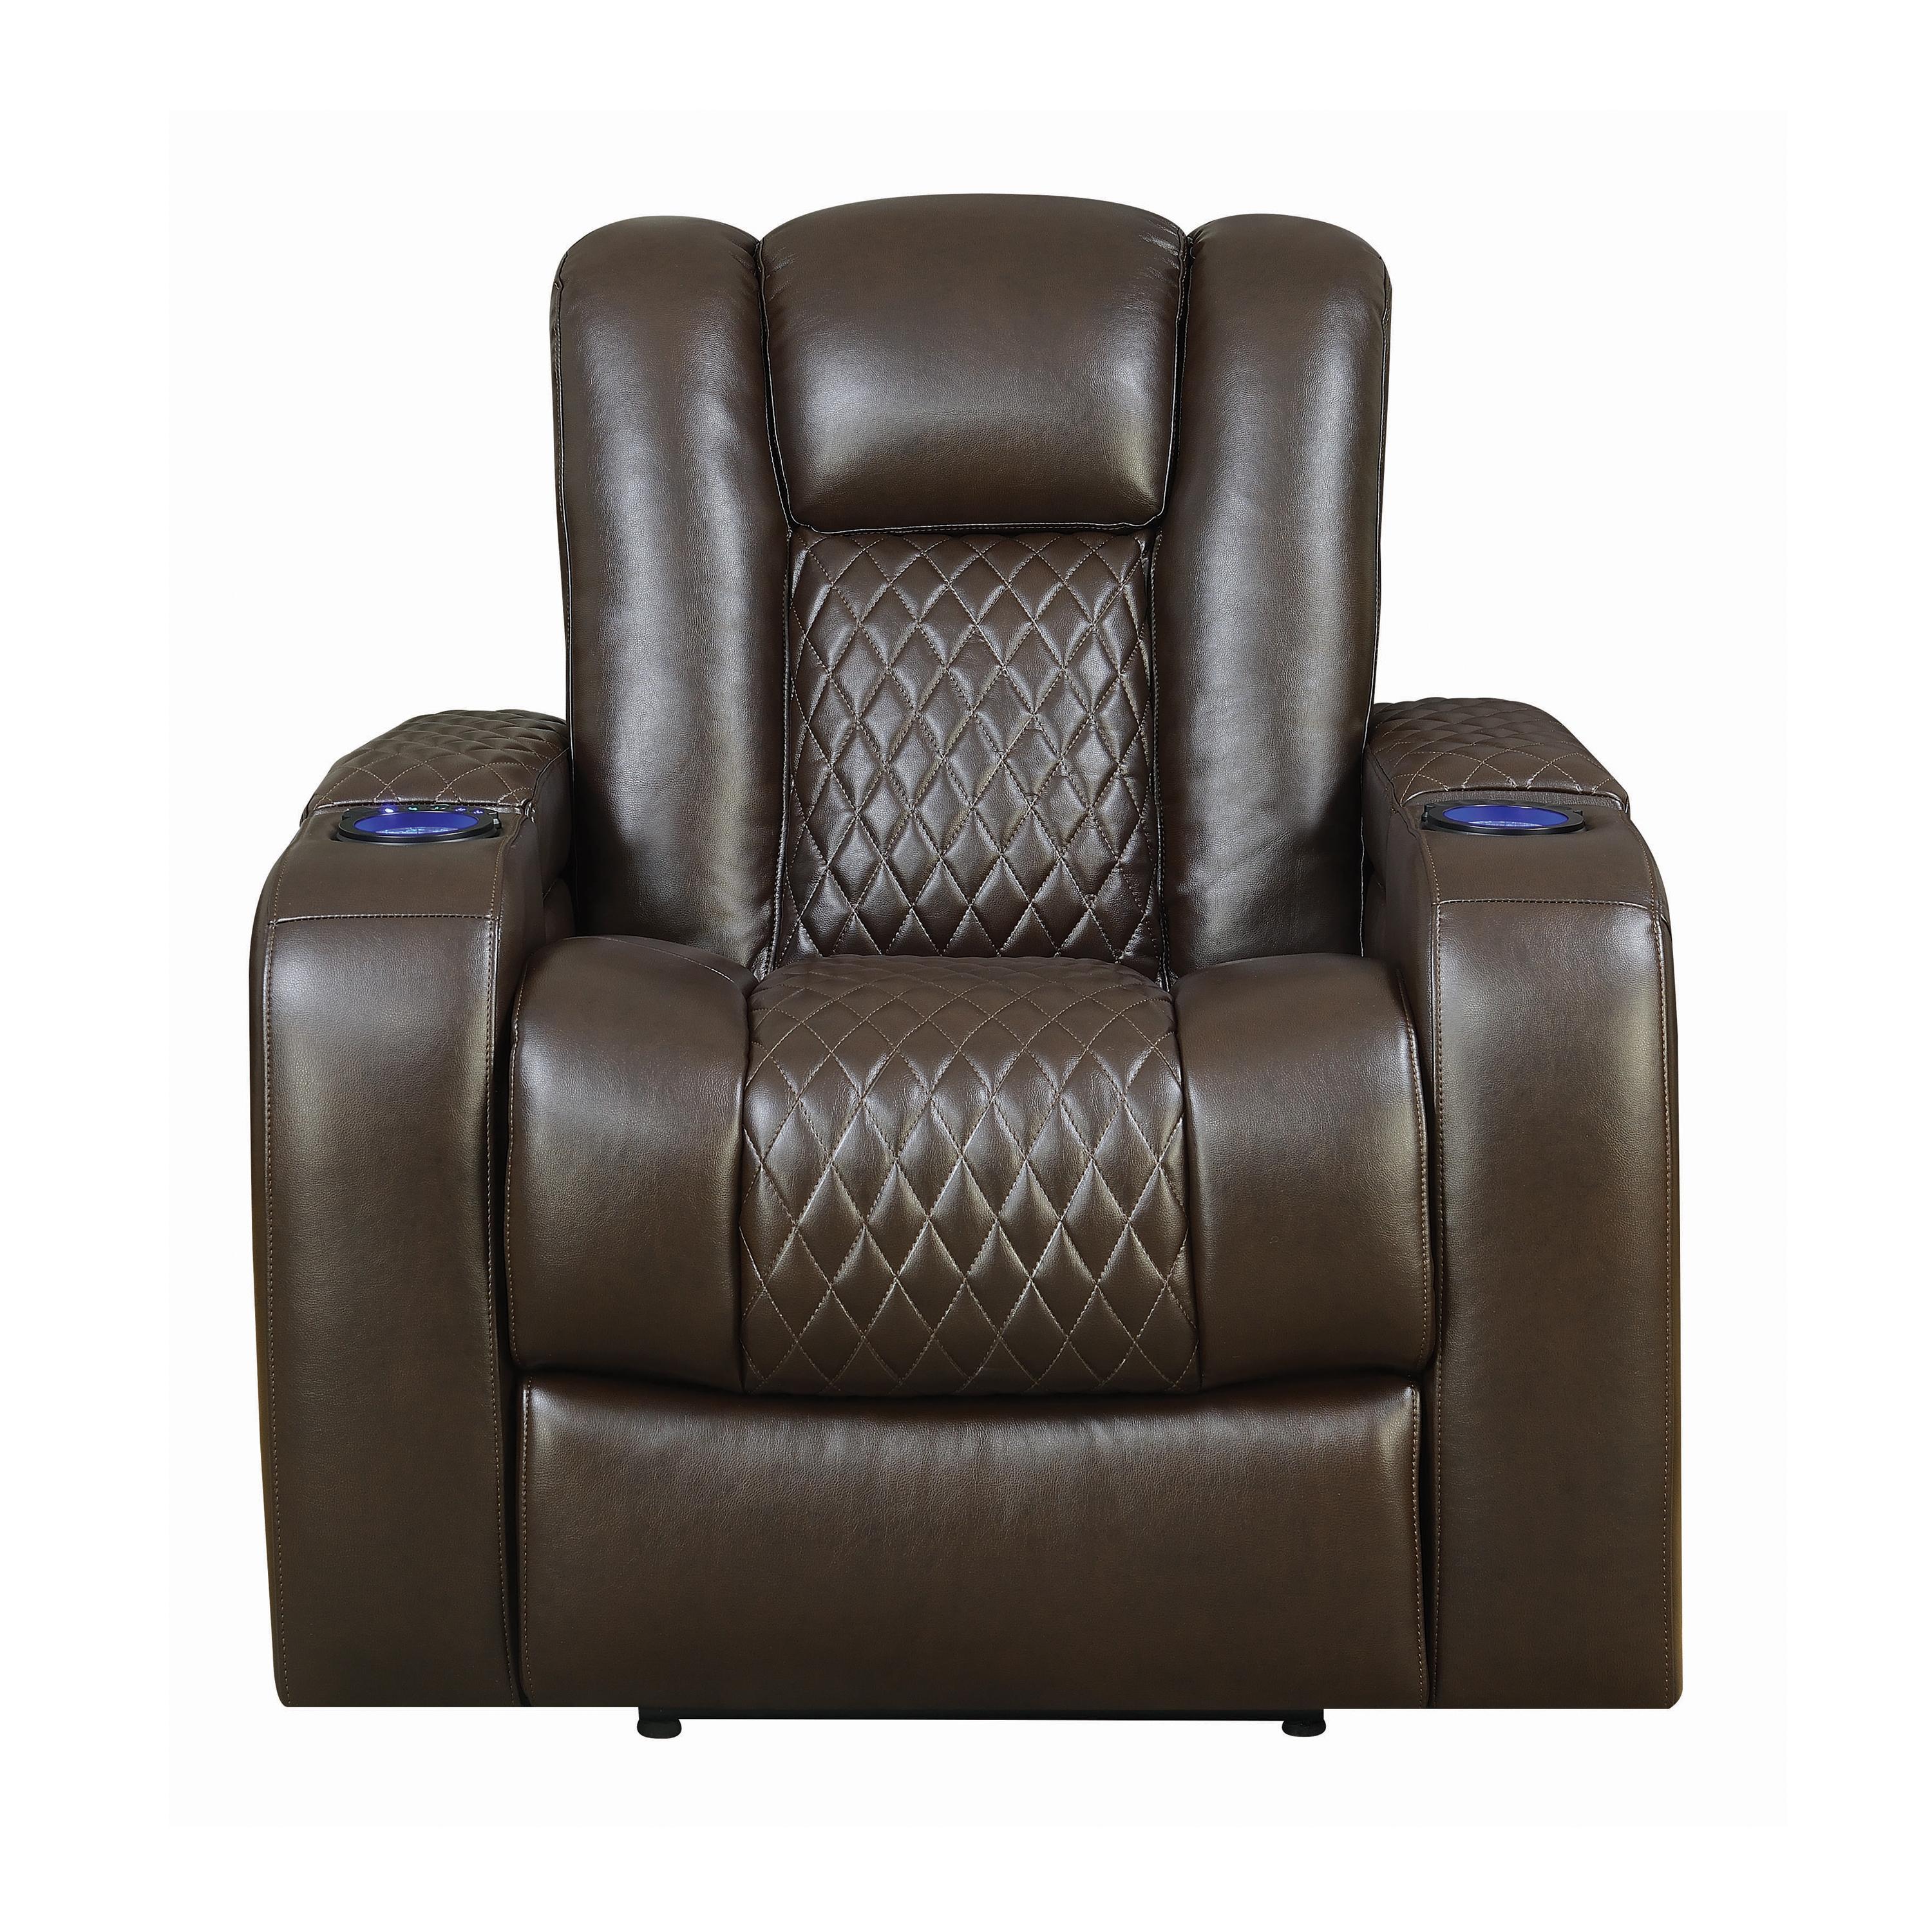 

    
Contemporary Brown Faux Leather Power Recliner Coaster 602306P Delangelo
